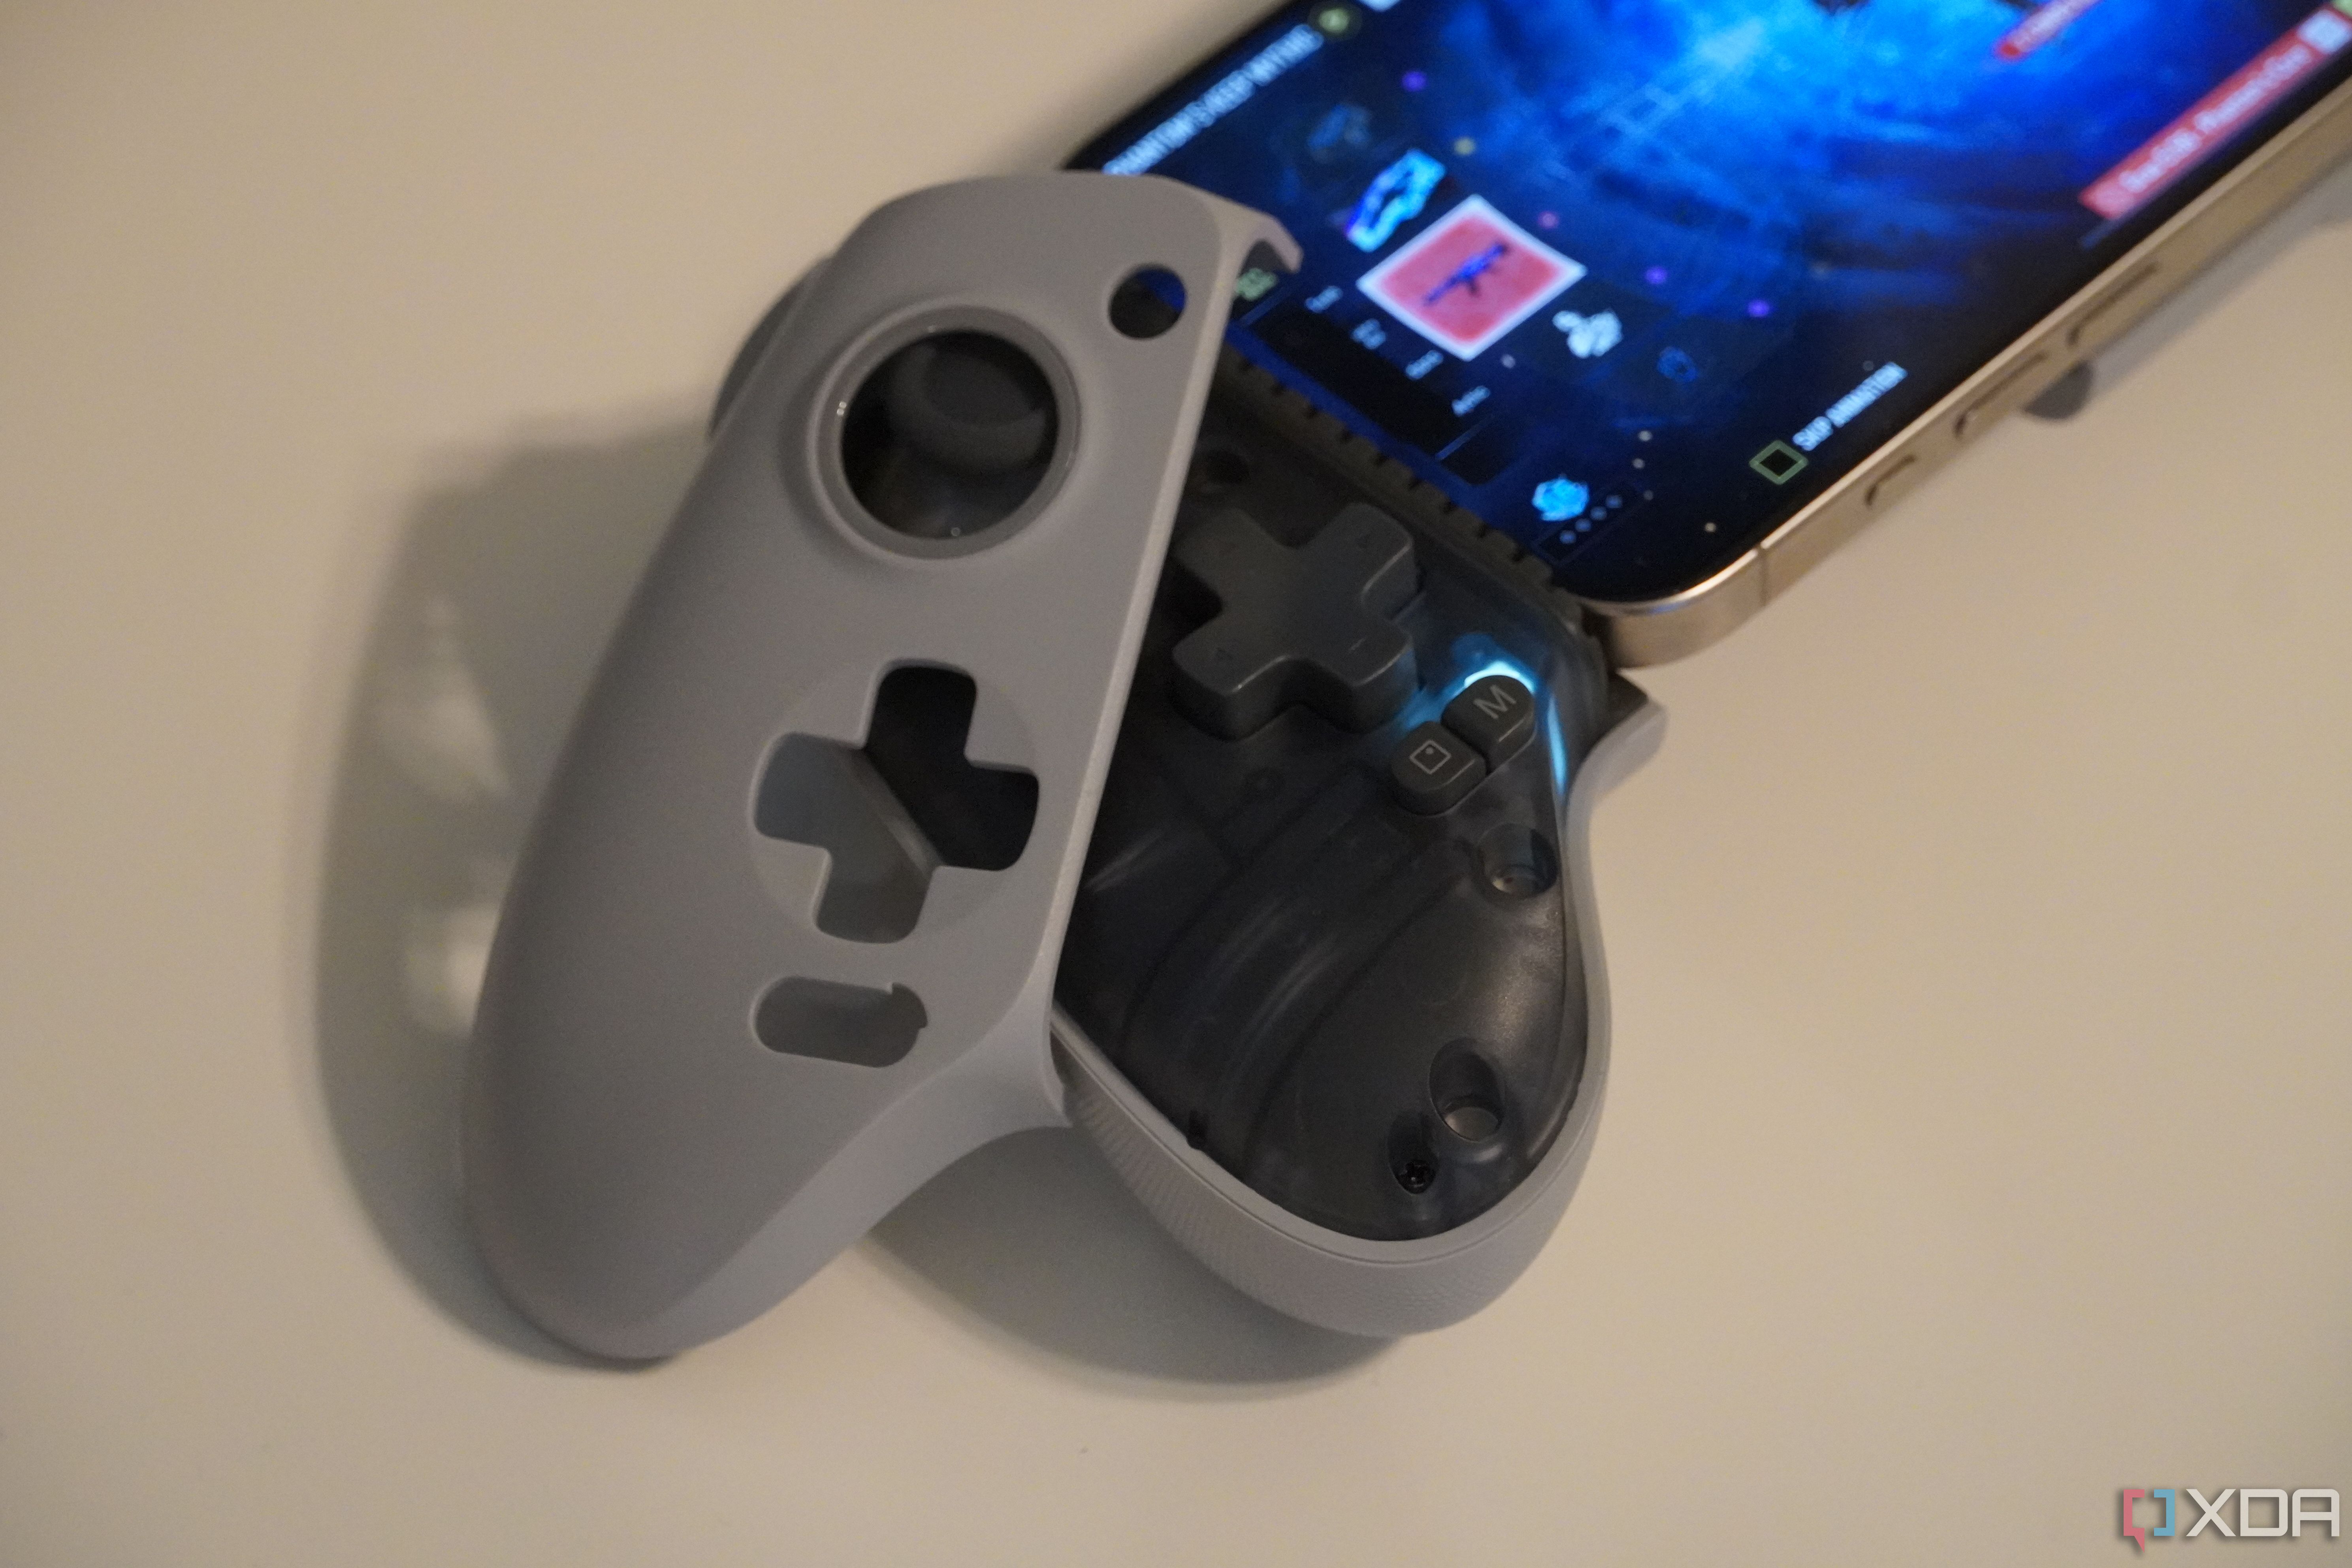 GameSir G8 Galileo review: Your phone is finally a proper portable